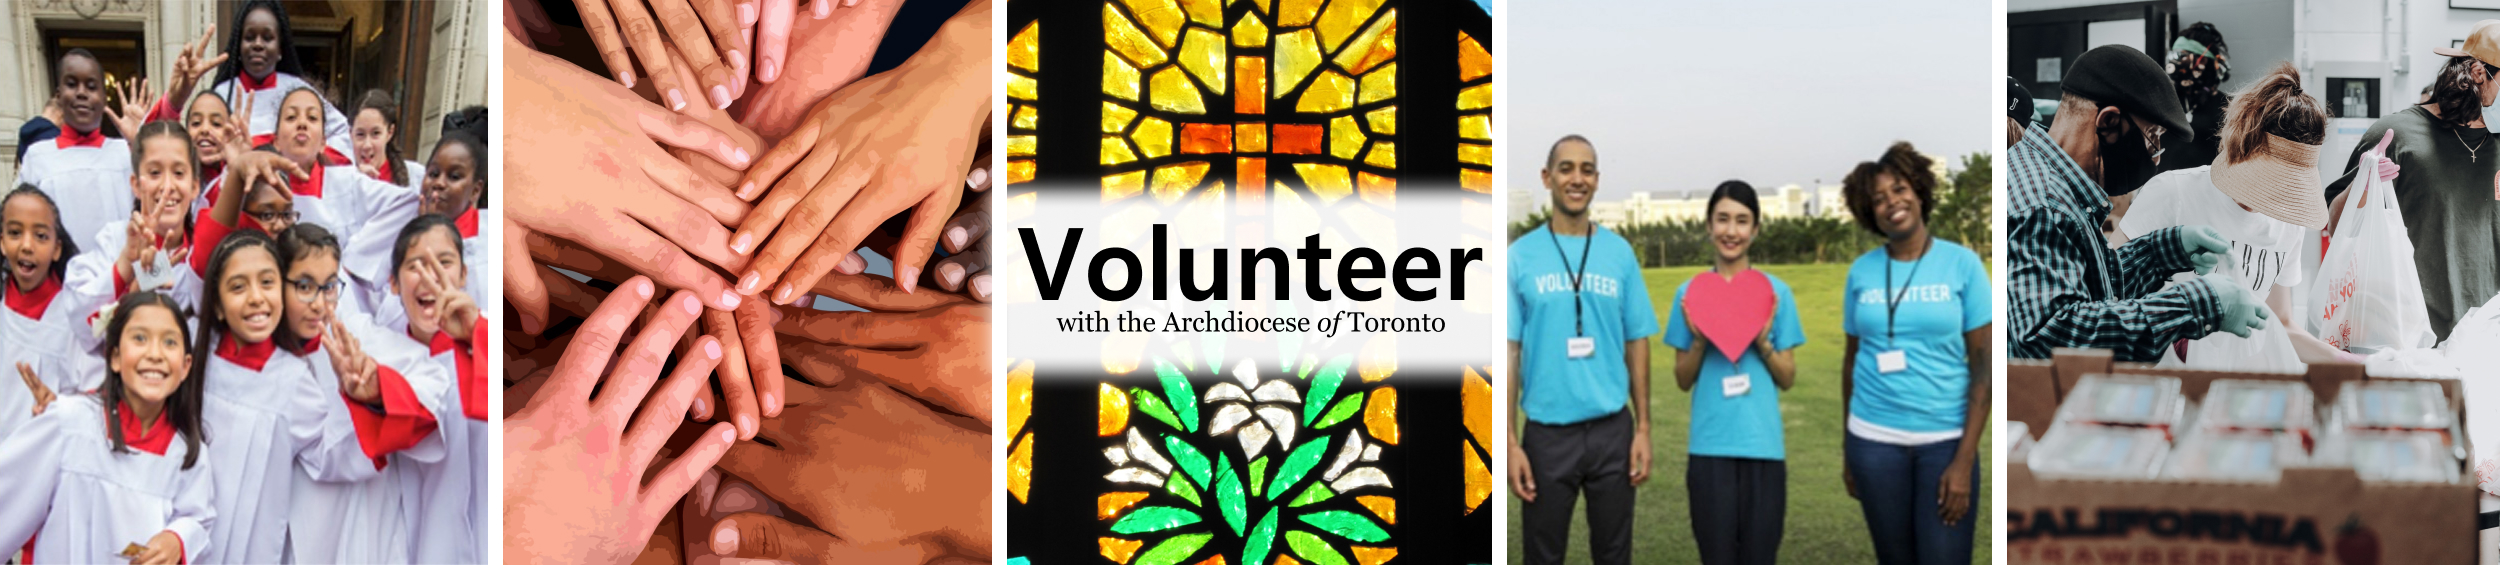 Banner with text reading "Volunteer with the Archdiocese of Toronto" along with photos of volunteers